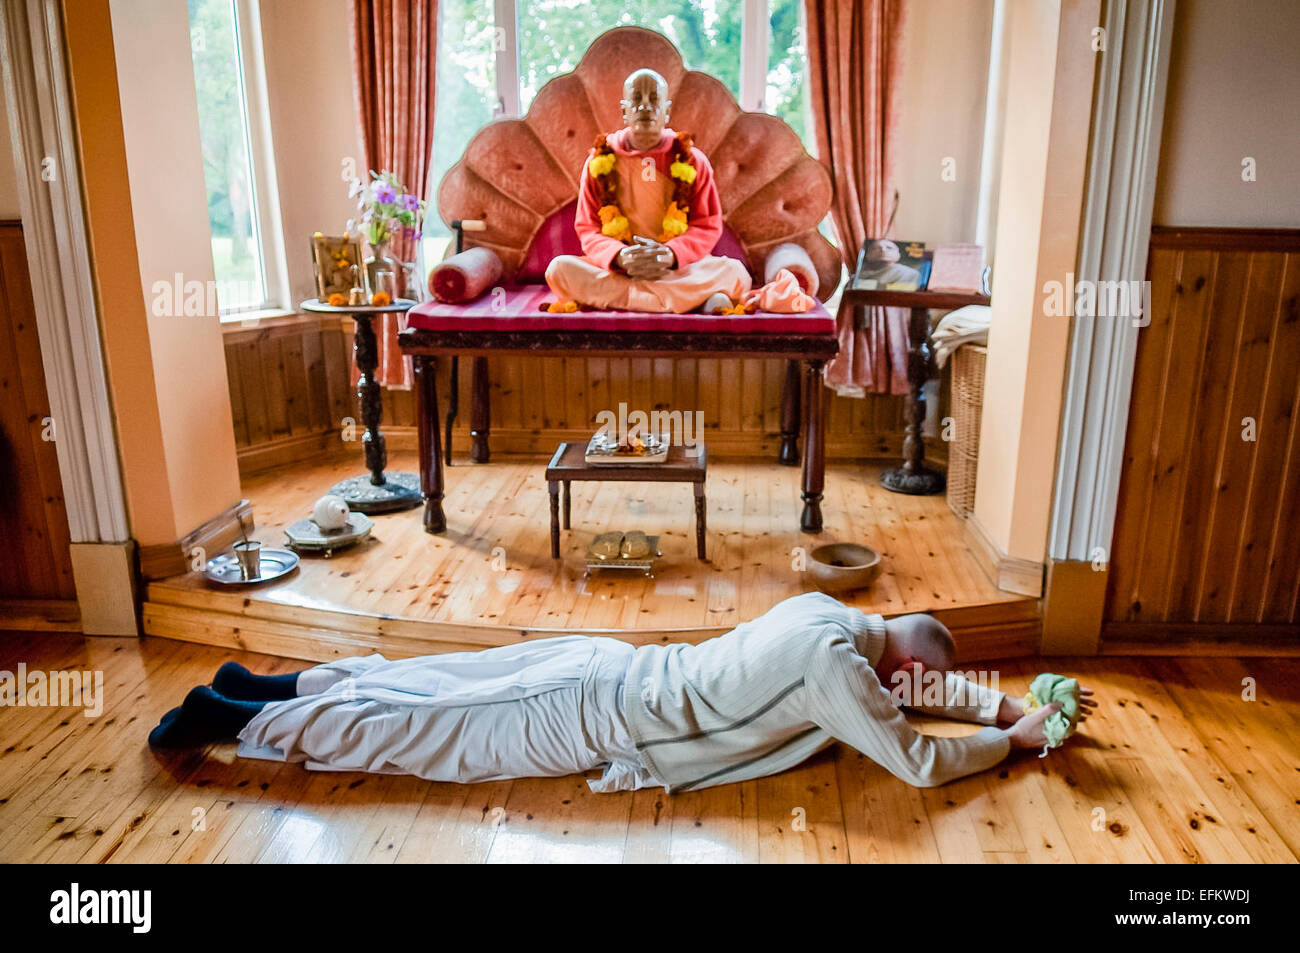 A Hare Krishna devotee wearing white robes prostrates himself in front of a statue of A.C. Bhaktivedanta Swami Prabhupada founder of the Hare Krishna Movement. Stock Photo